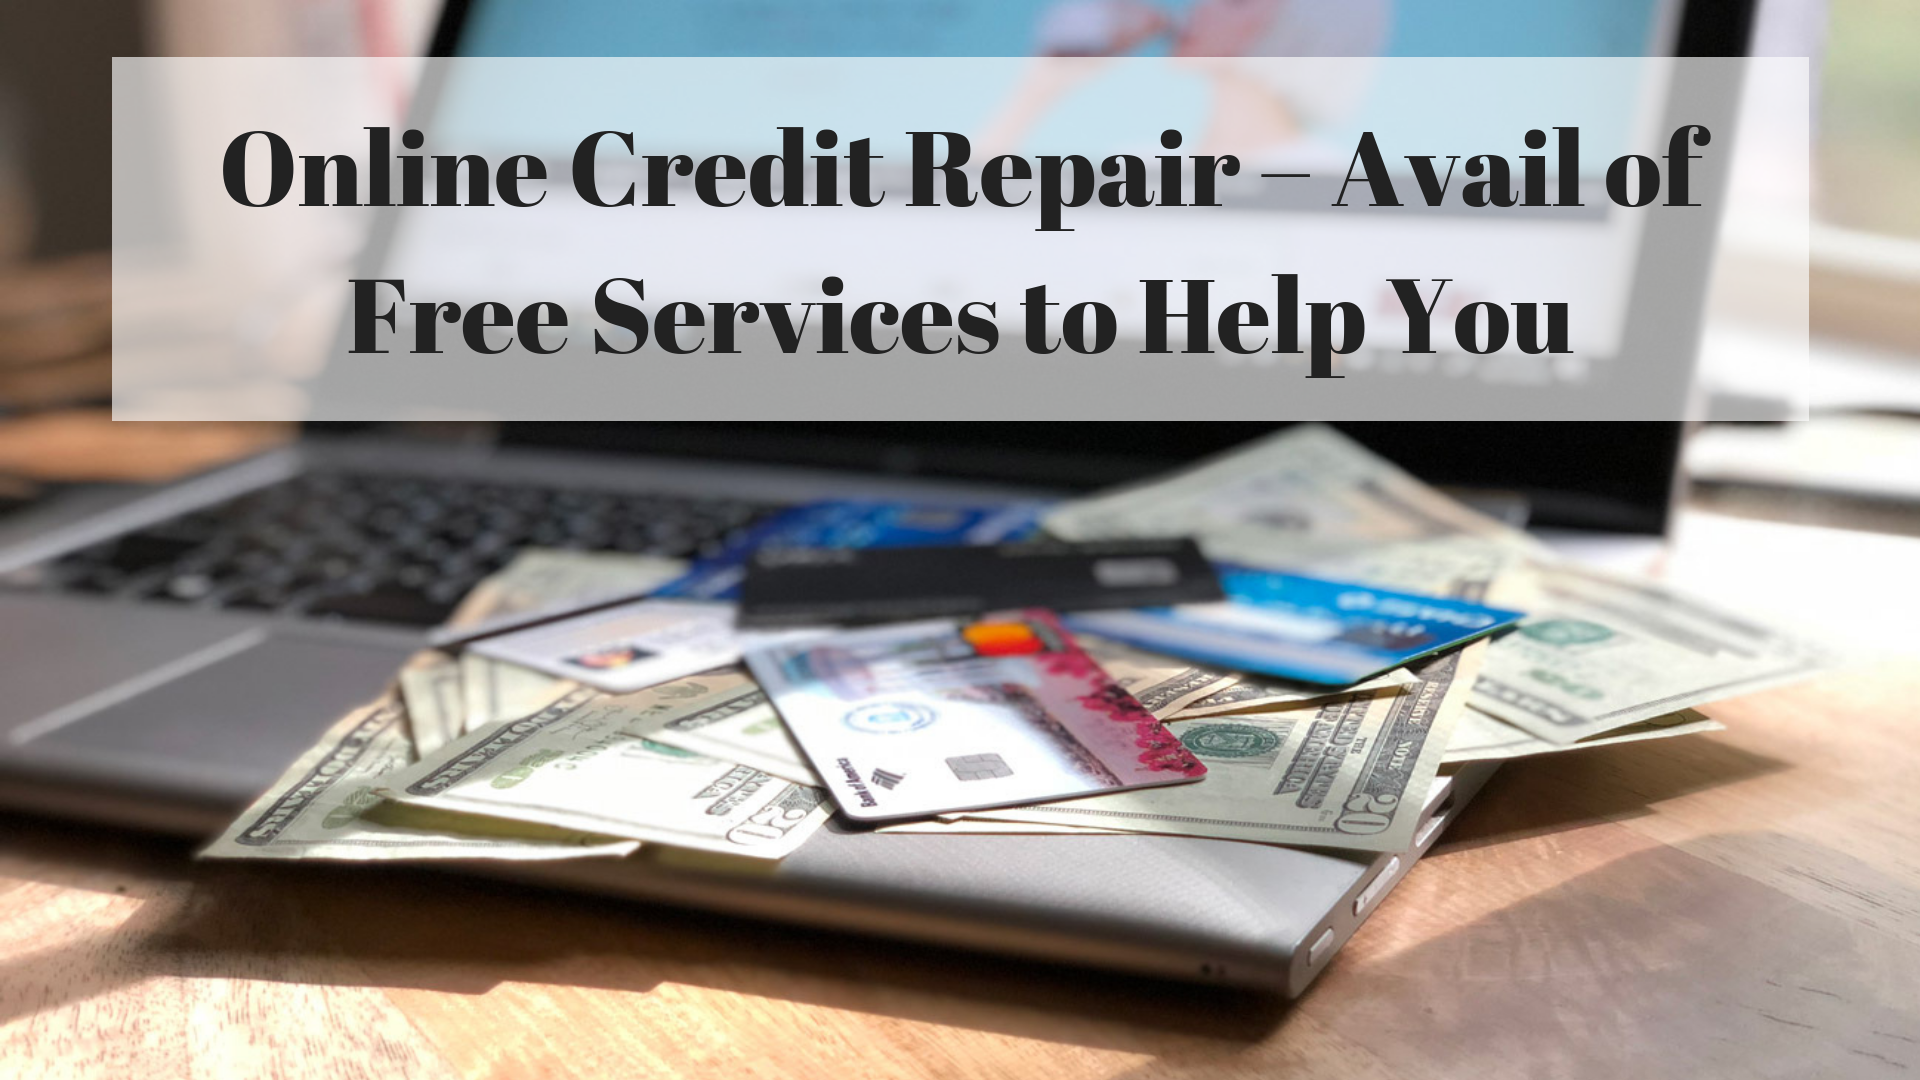 Online Credit Repair – Avail of Free Services to Help You